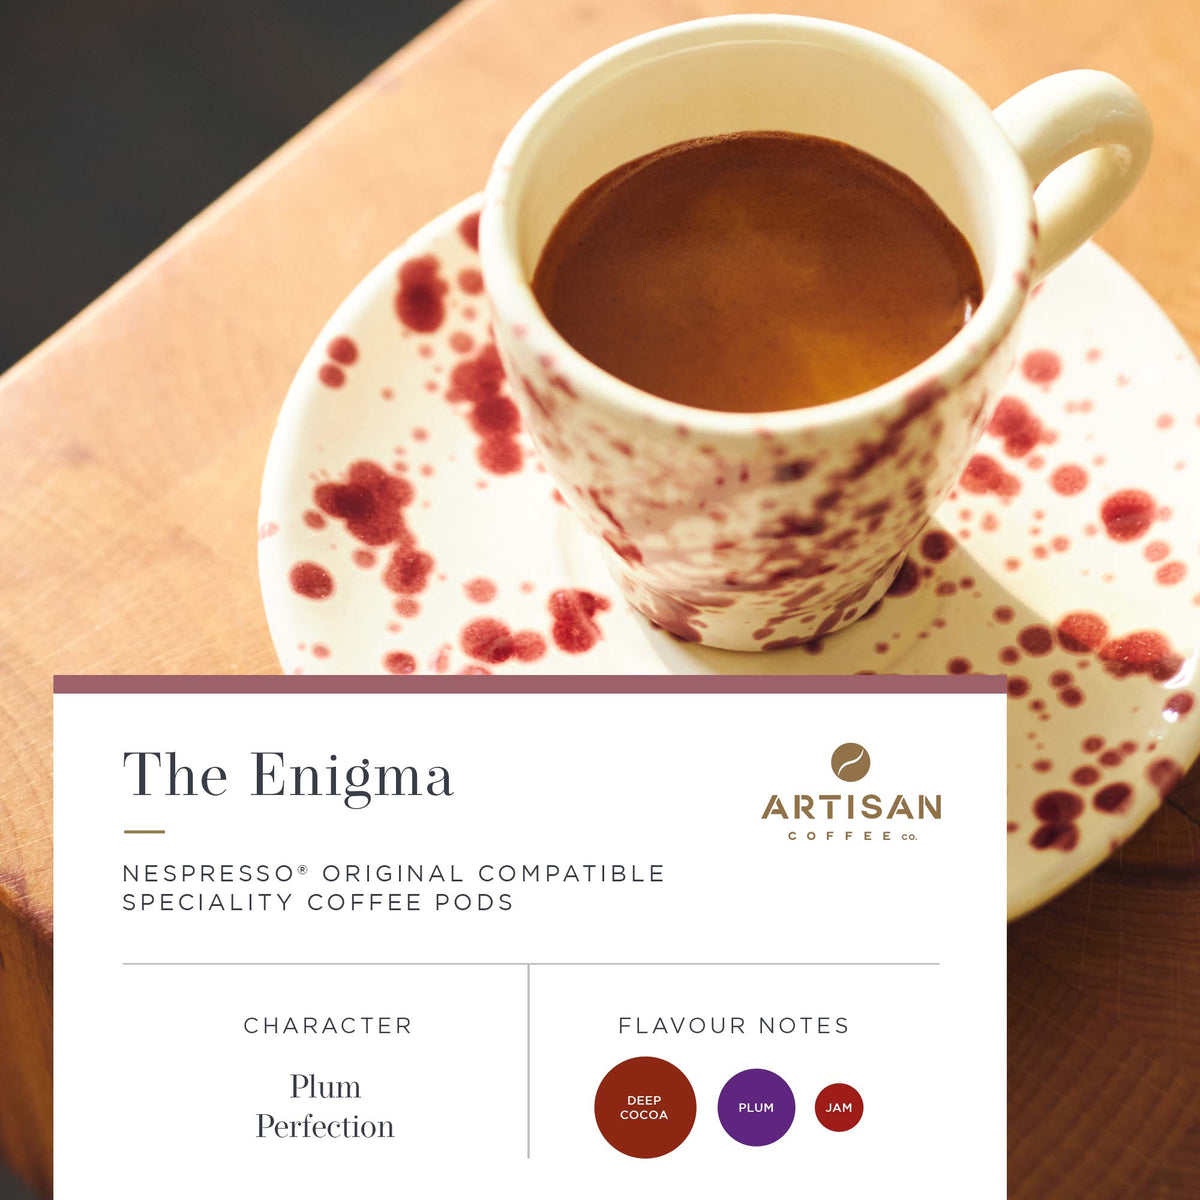 Artisan Coffee Co The Enigma Pods Infographic. Flavour Notes